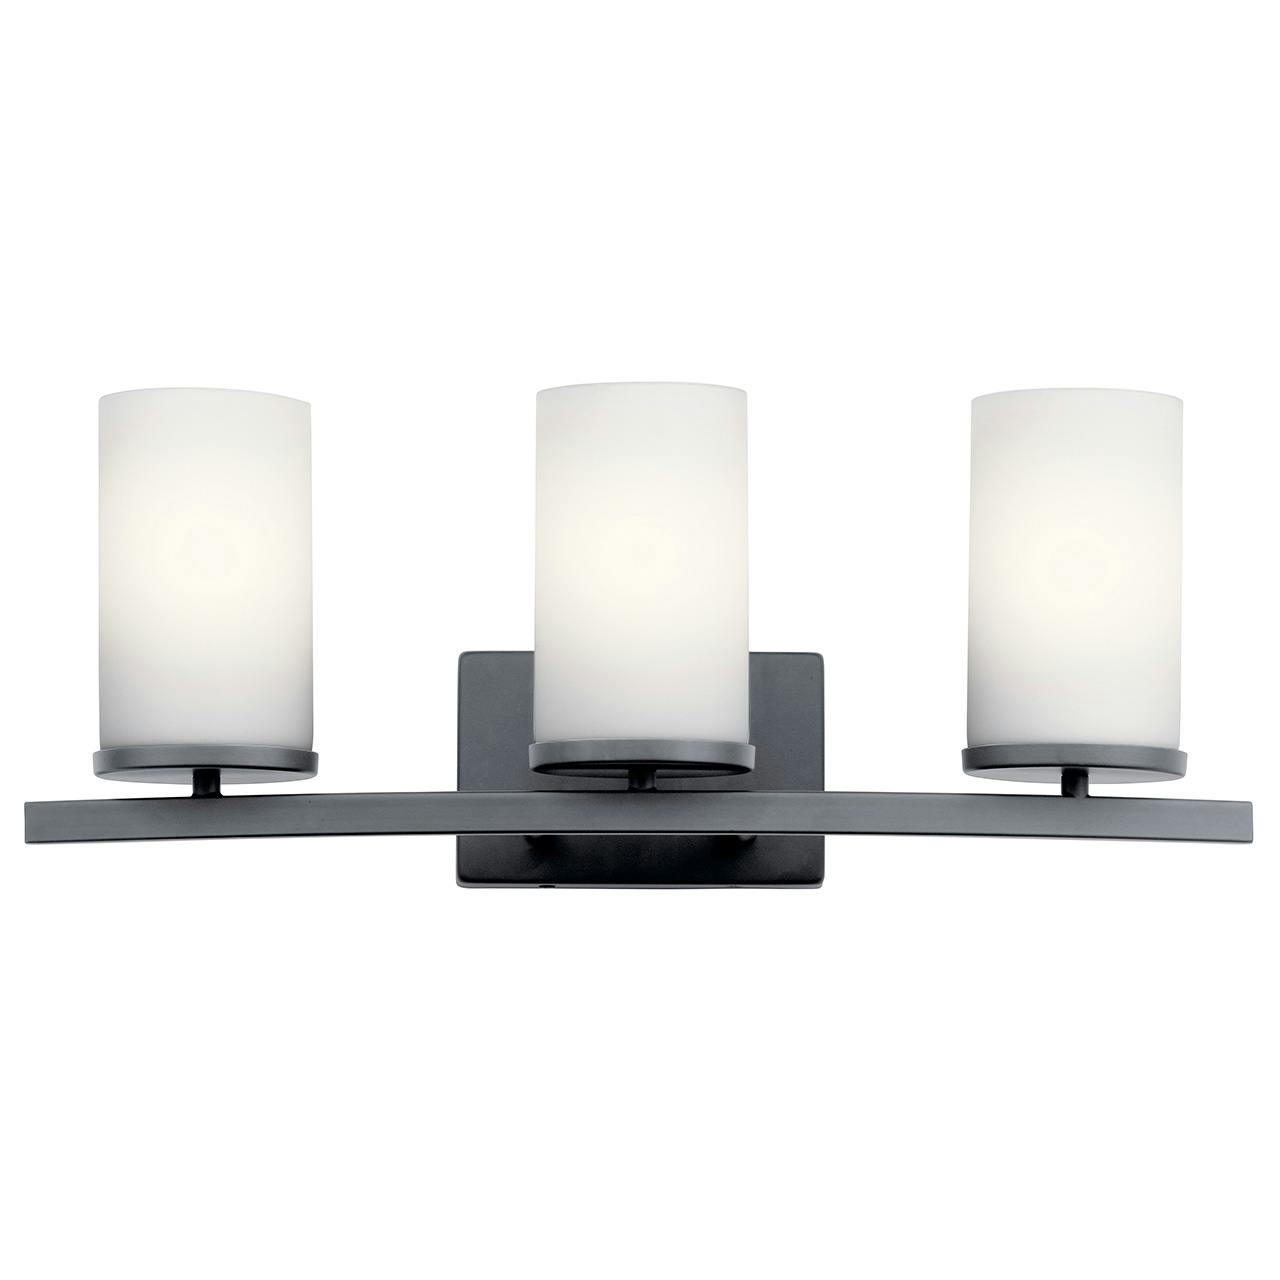 The Crosby 3 Light Vanity Light Black facing up on a white background